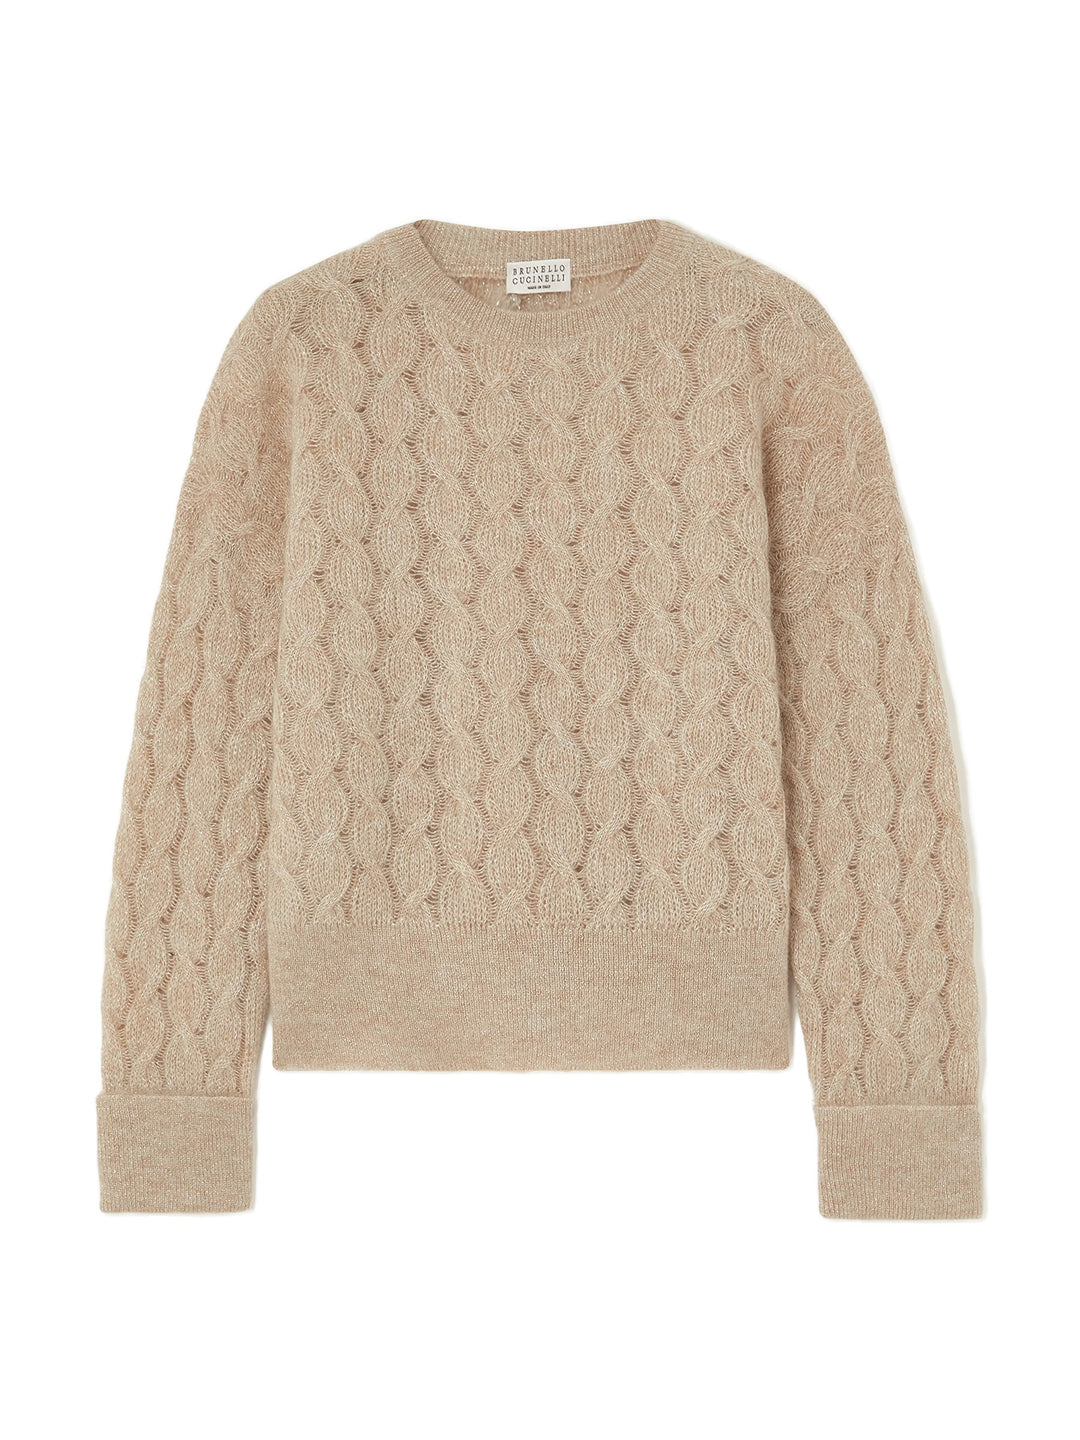 Brunello Cucinelli Sparkly Cable Knit Sweater